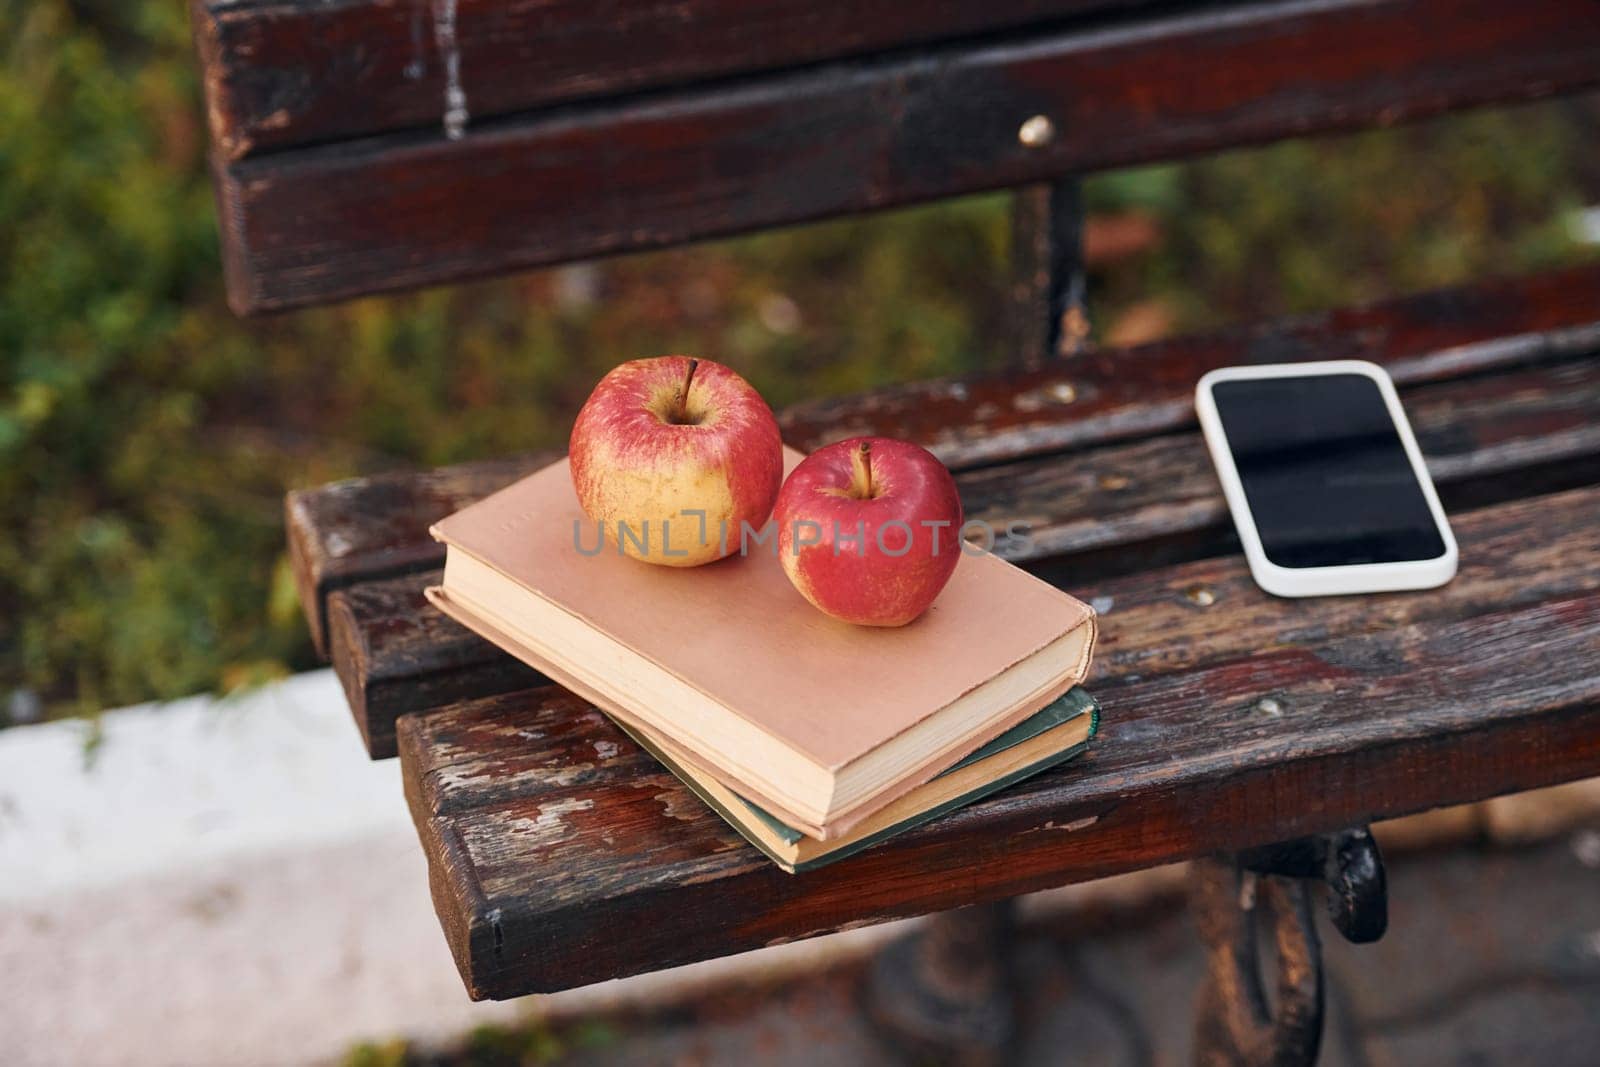 Close up view of couch, and books, apples and smartphone on it.